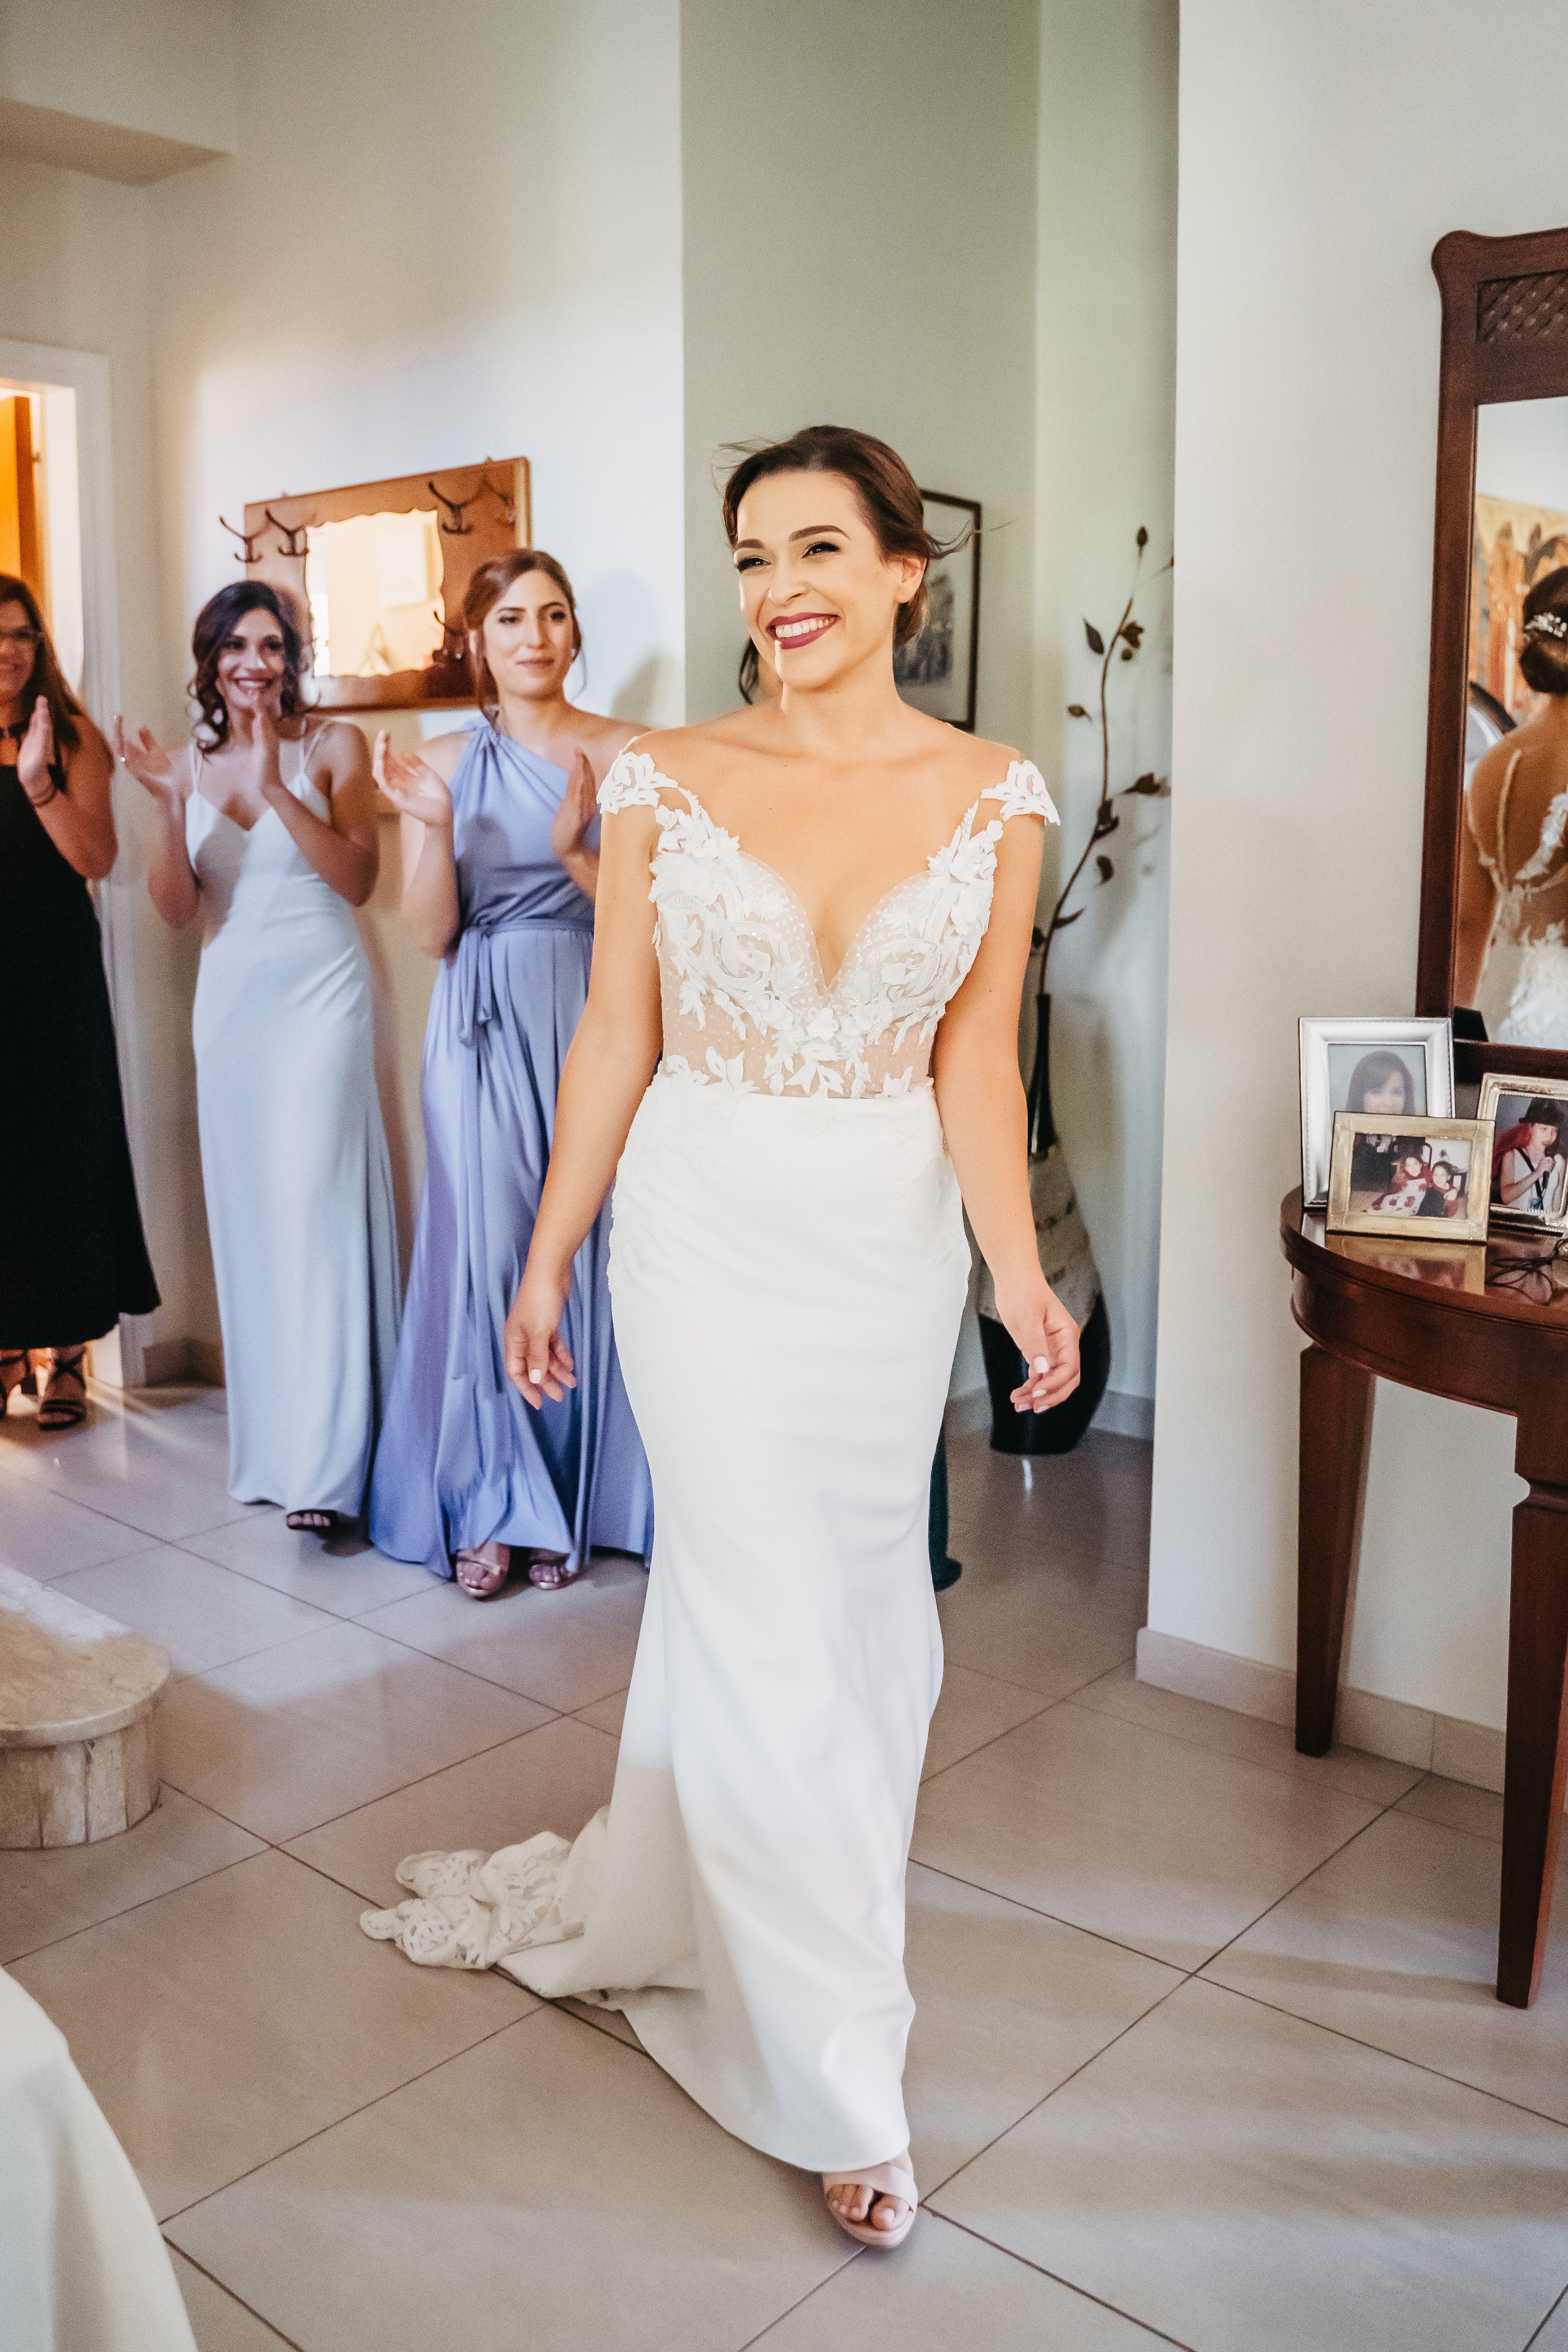 The couple's love shone bright as they exchanged vows amidst the stunning landscapes of Cyprus, our photographer capturing every moment with beautiful wedding photography.